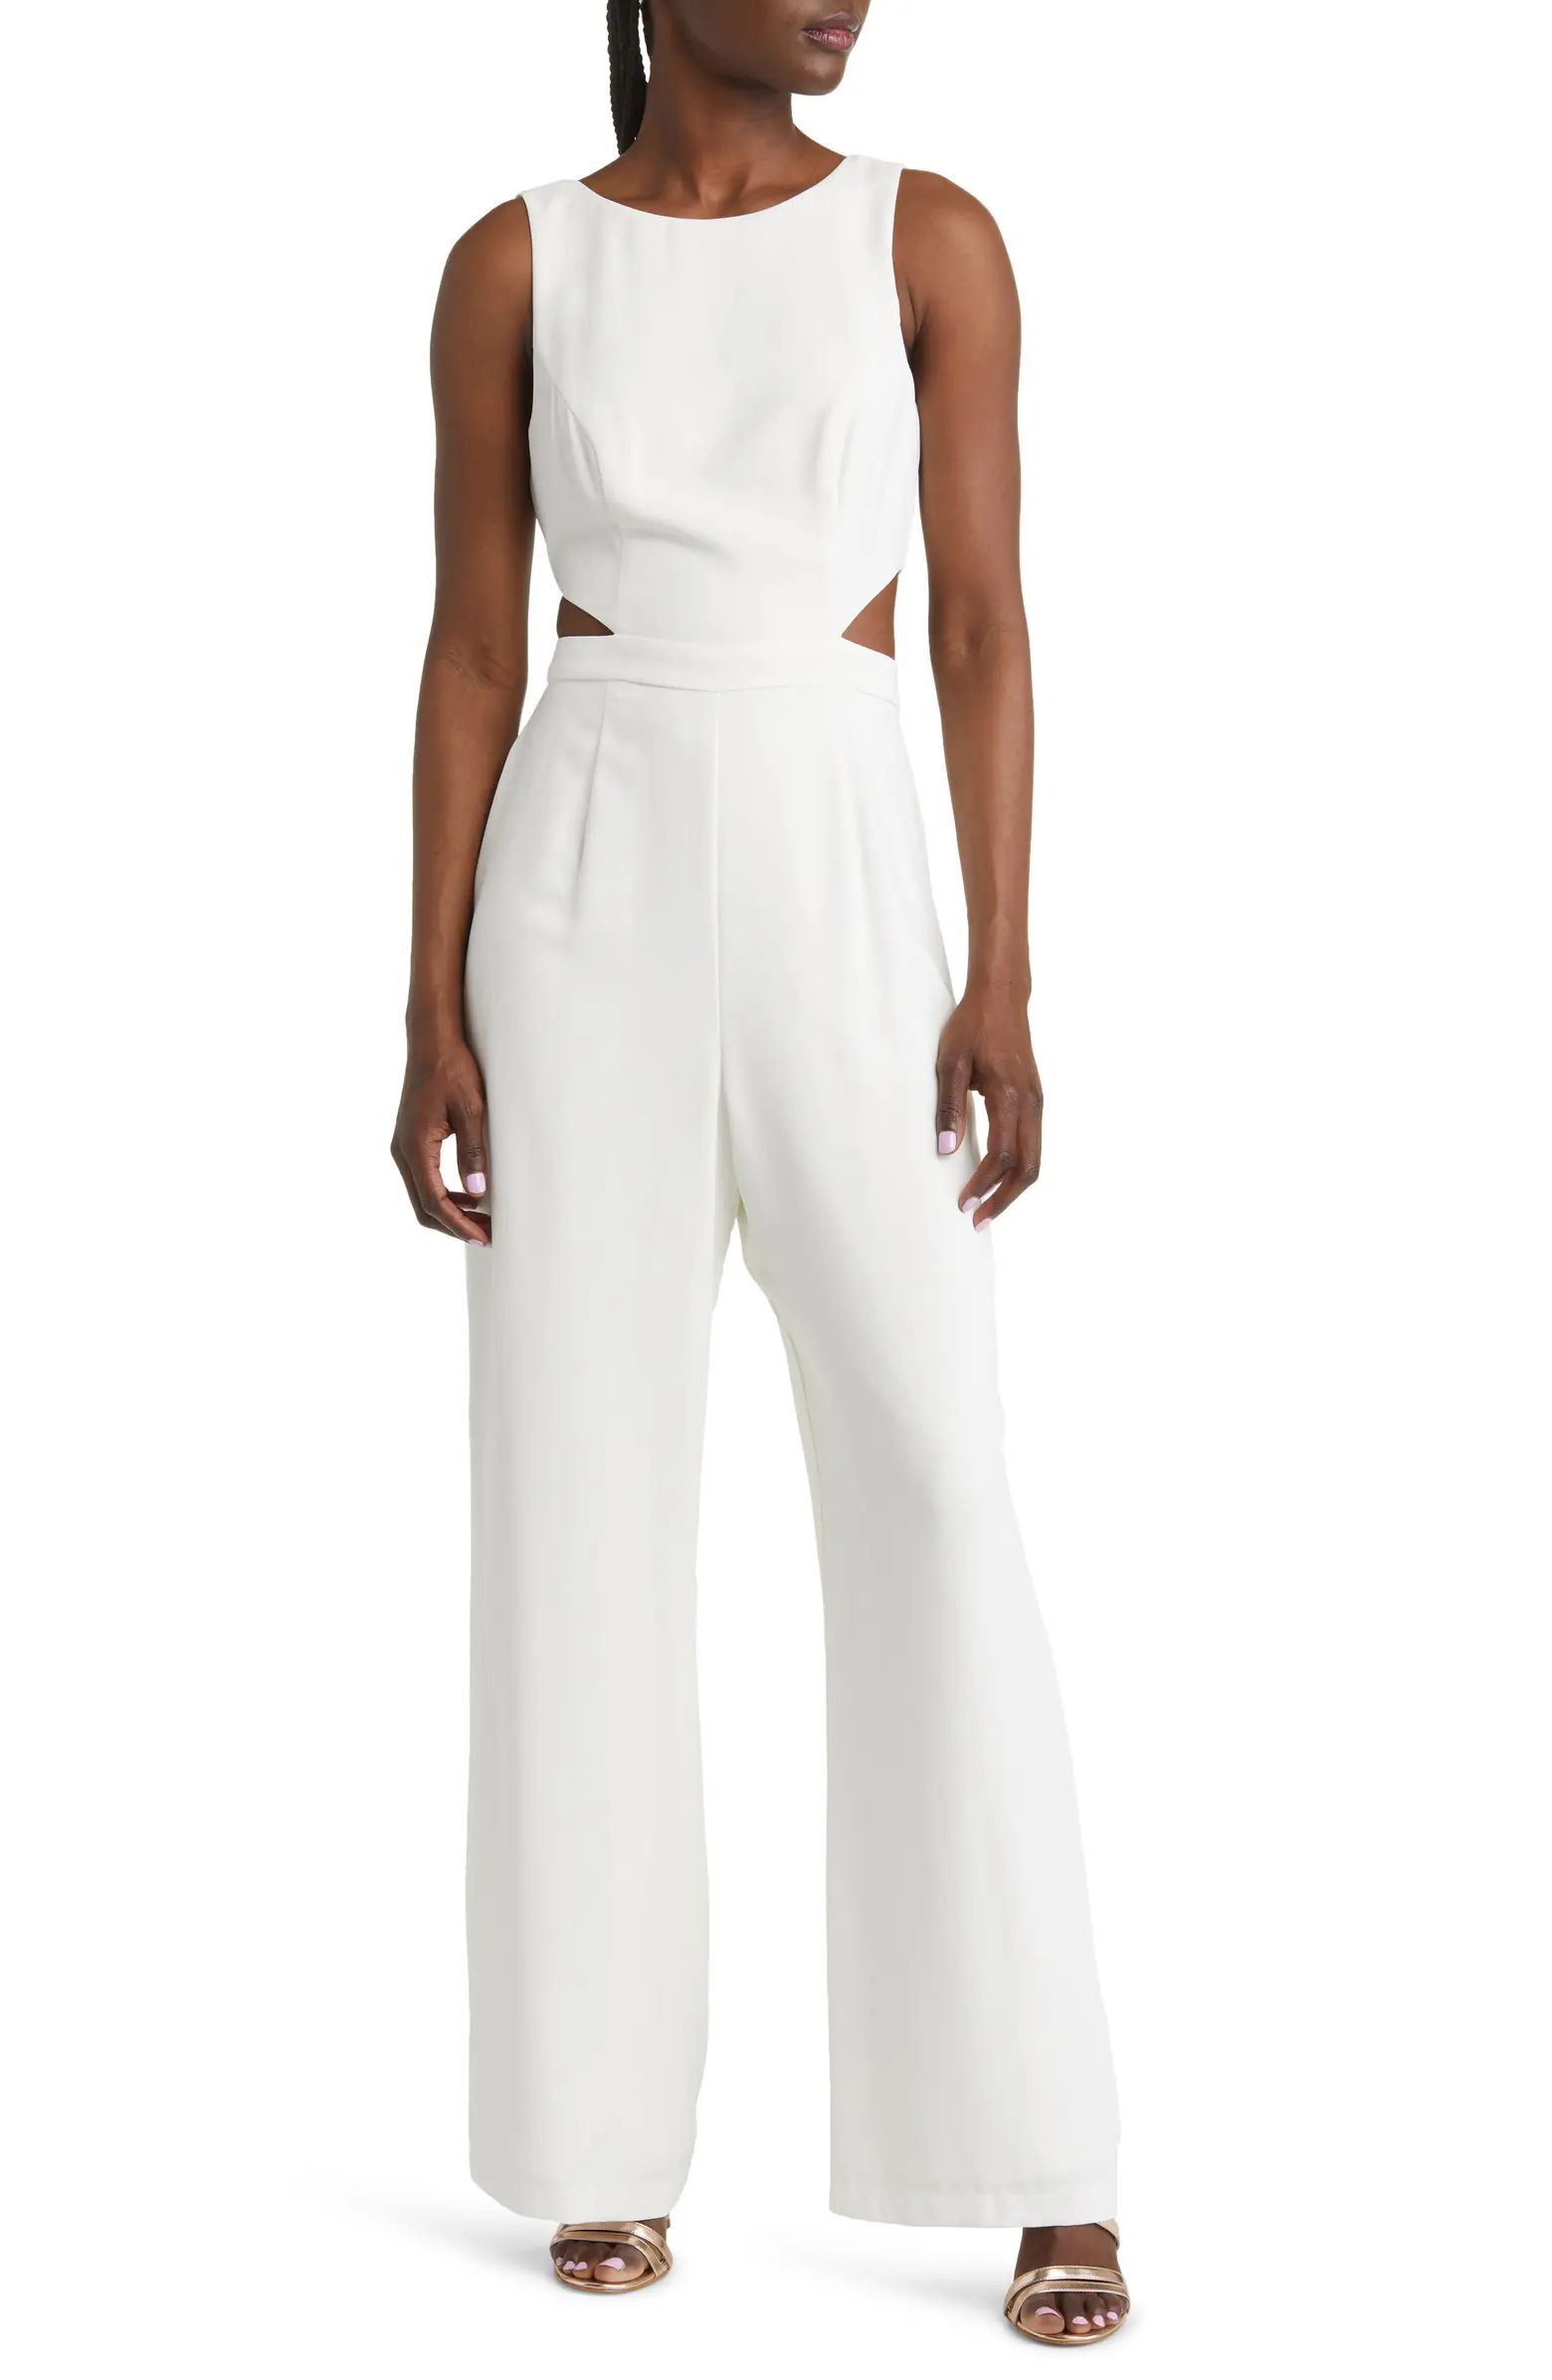 Lulus Moments to Remember Sleeveless Cutout Jumpsuit | Nordstrom | Nordstrom